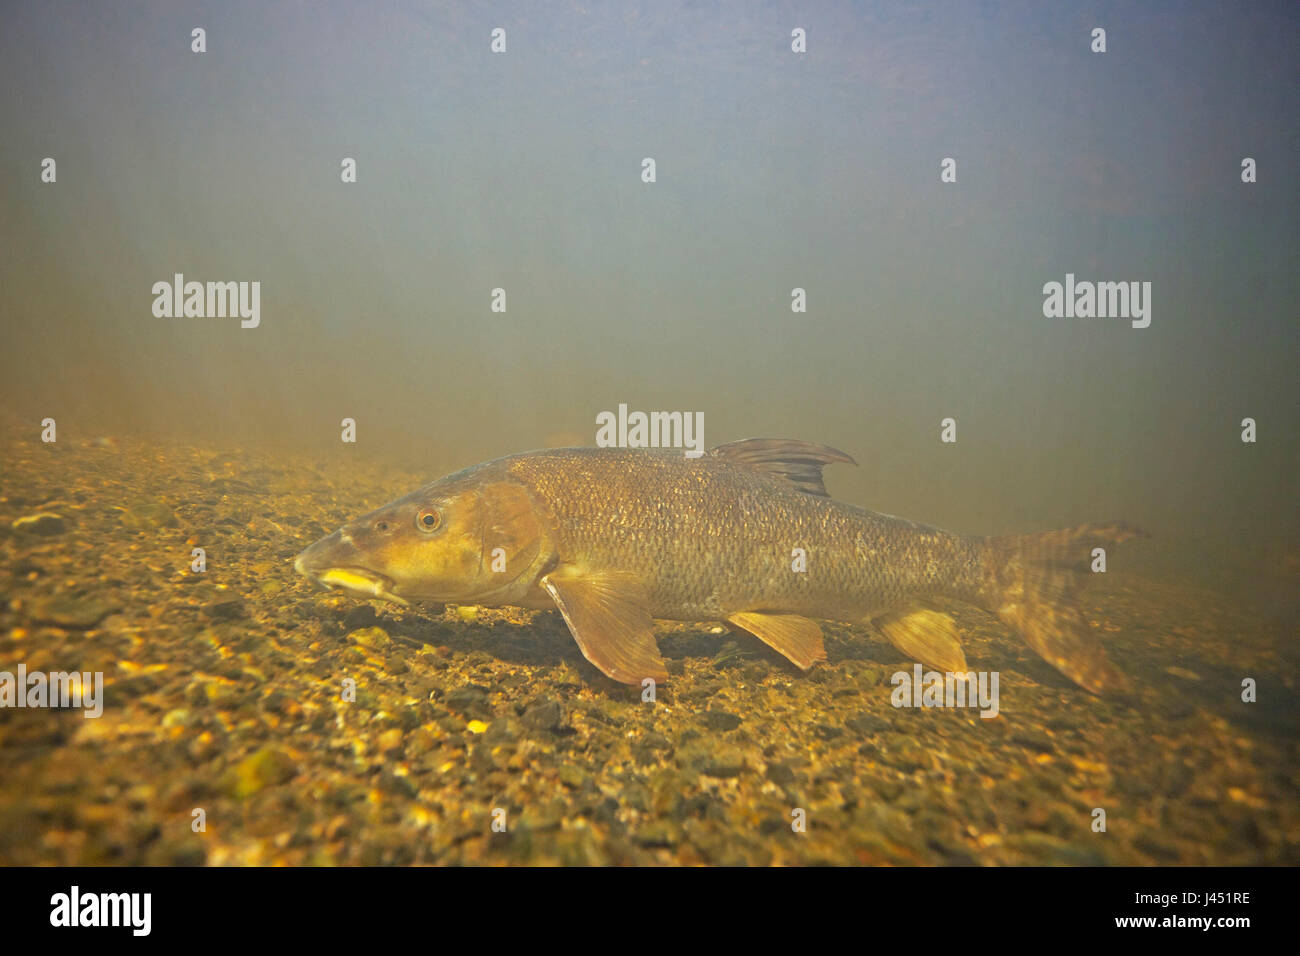 Common barbel under water in clear river Stock Photo